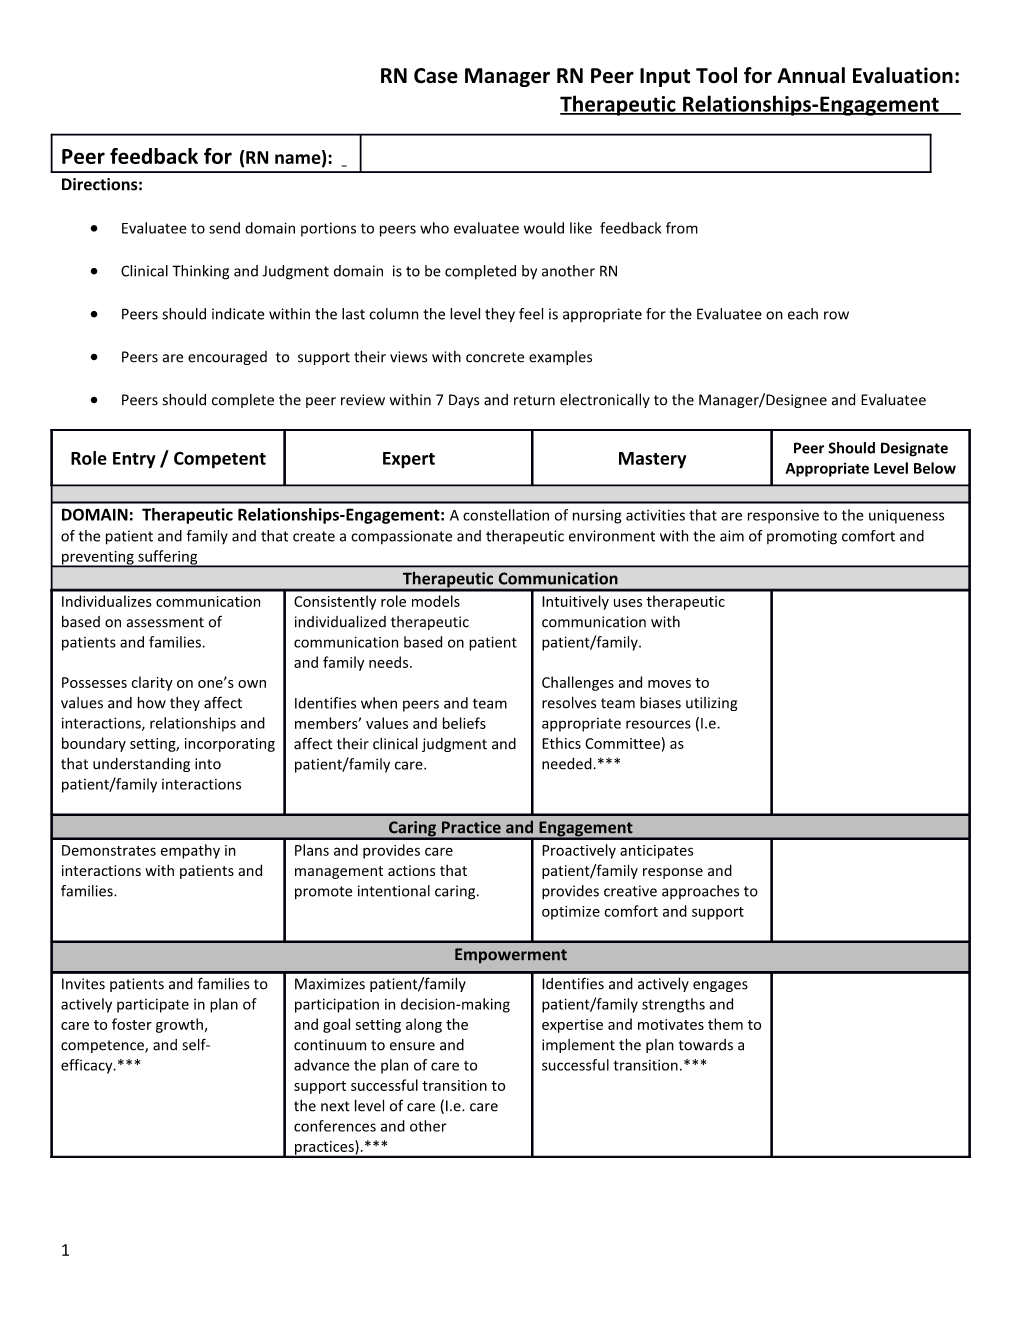 RN Case Managerrn Peer Input Tool for Annual Evaluation: Therapeutic Relationships-Engagement